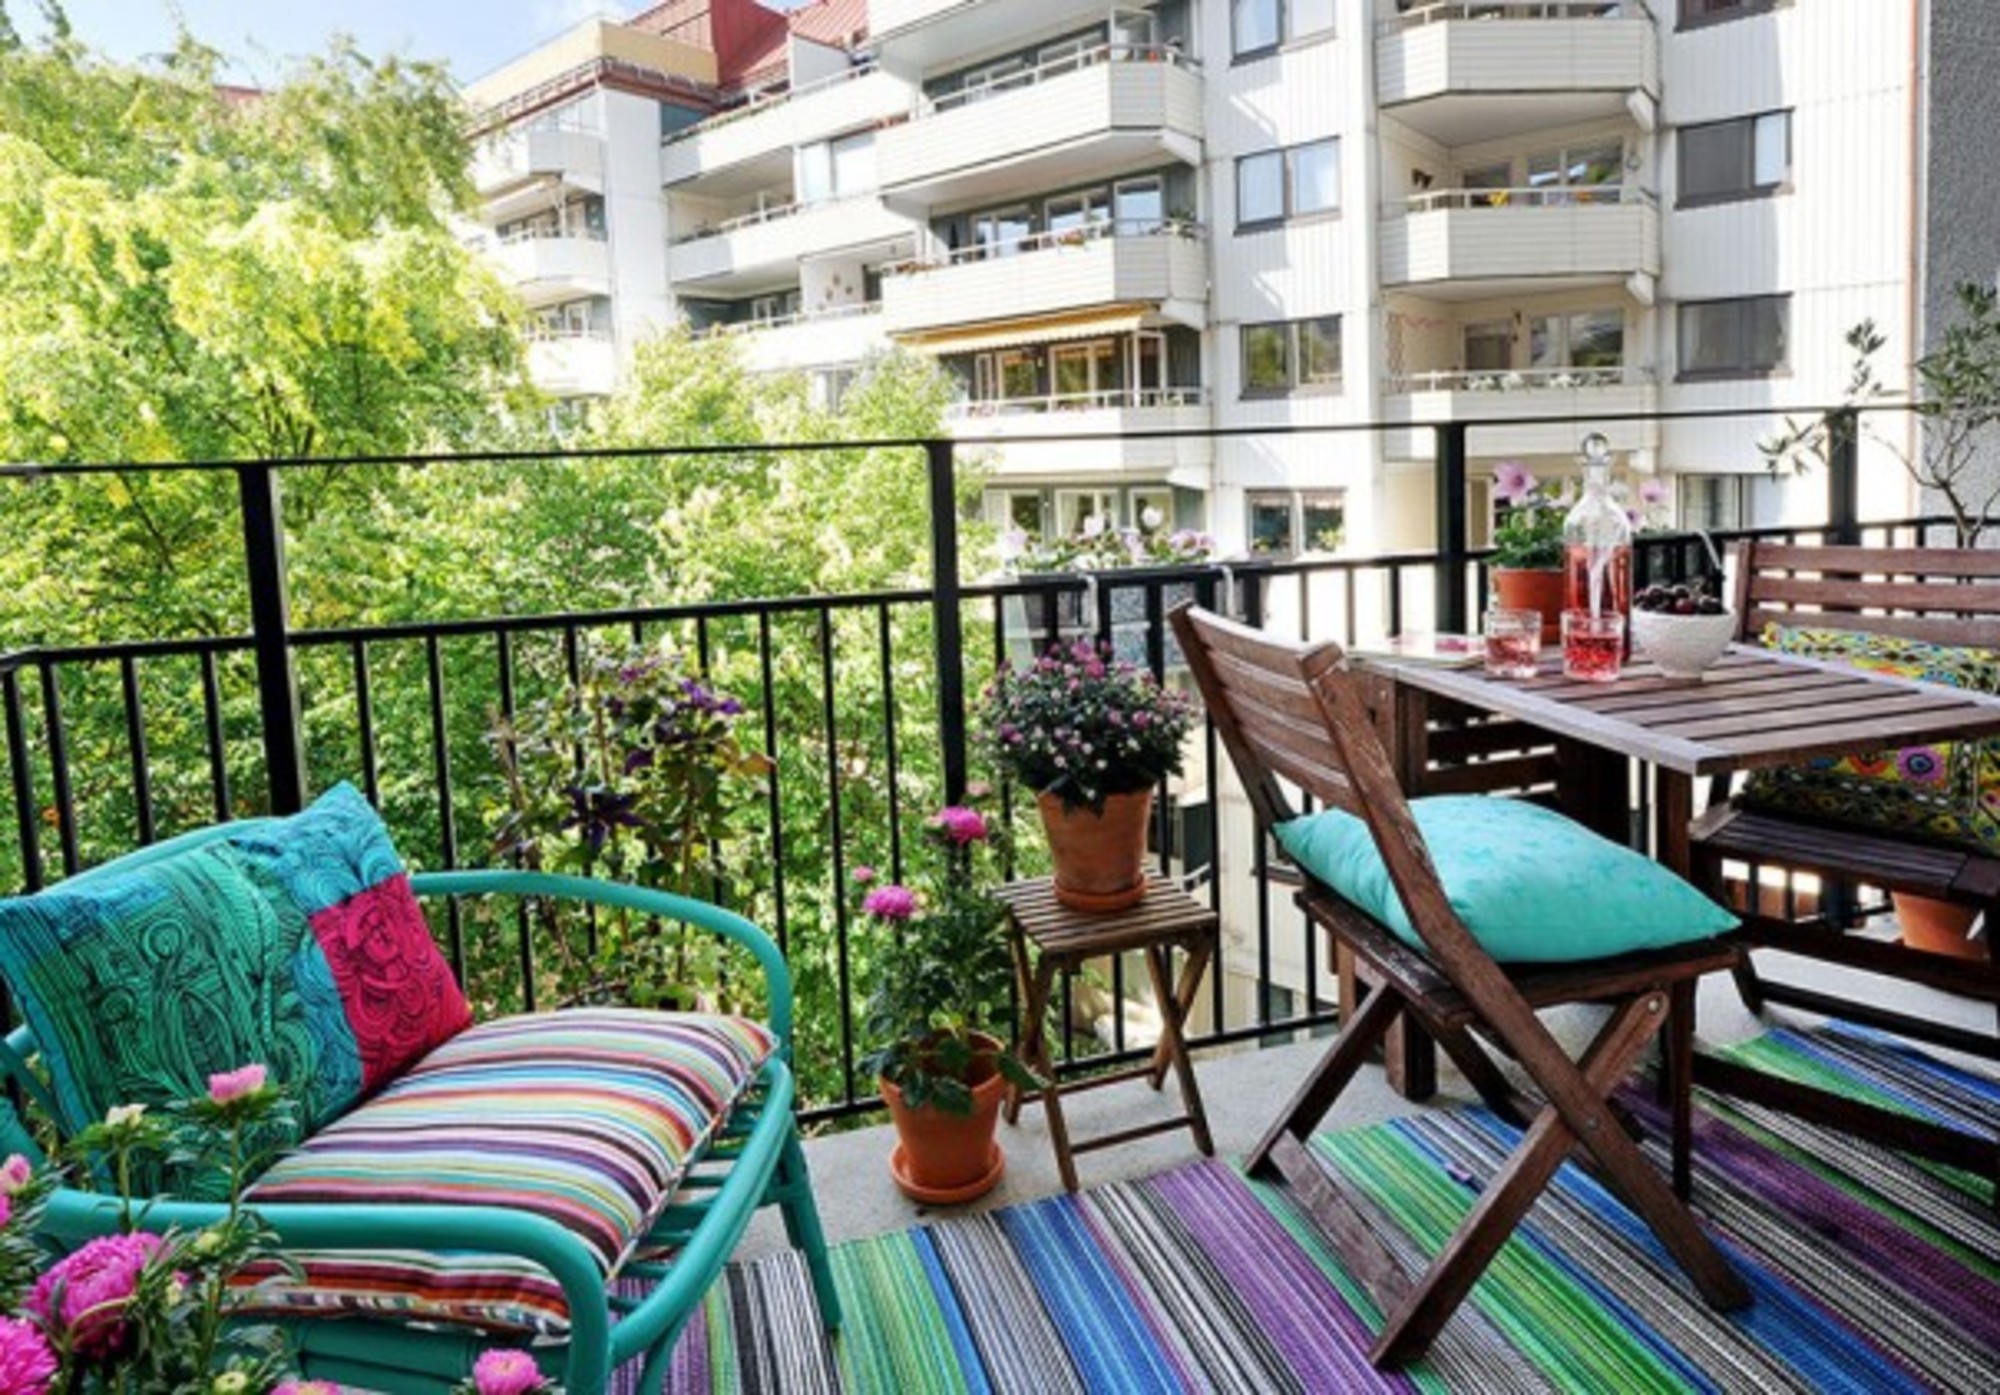 Outdoor : Balcony Design With Colorful Rugs And Chairs Balcony ...